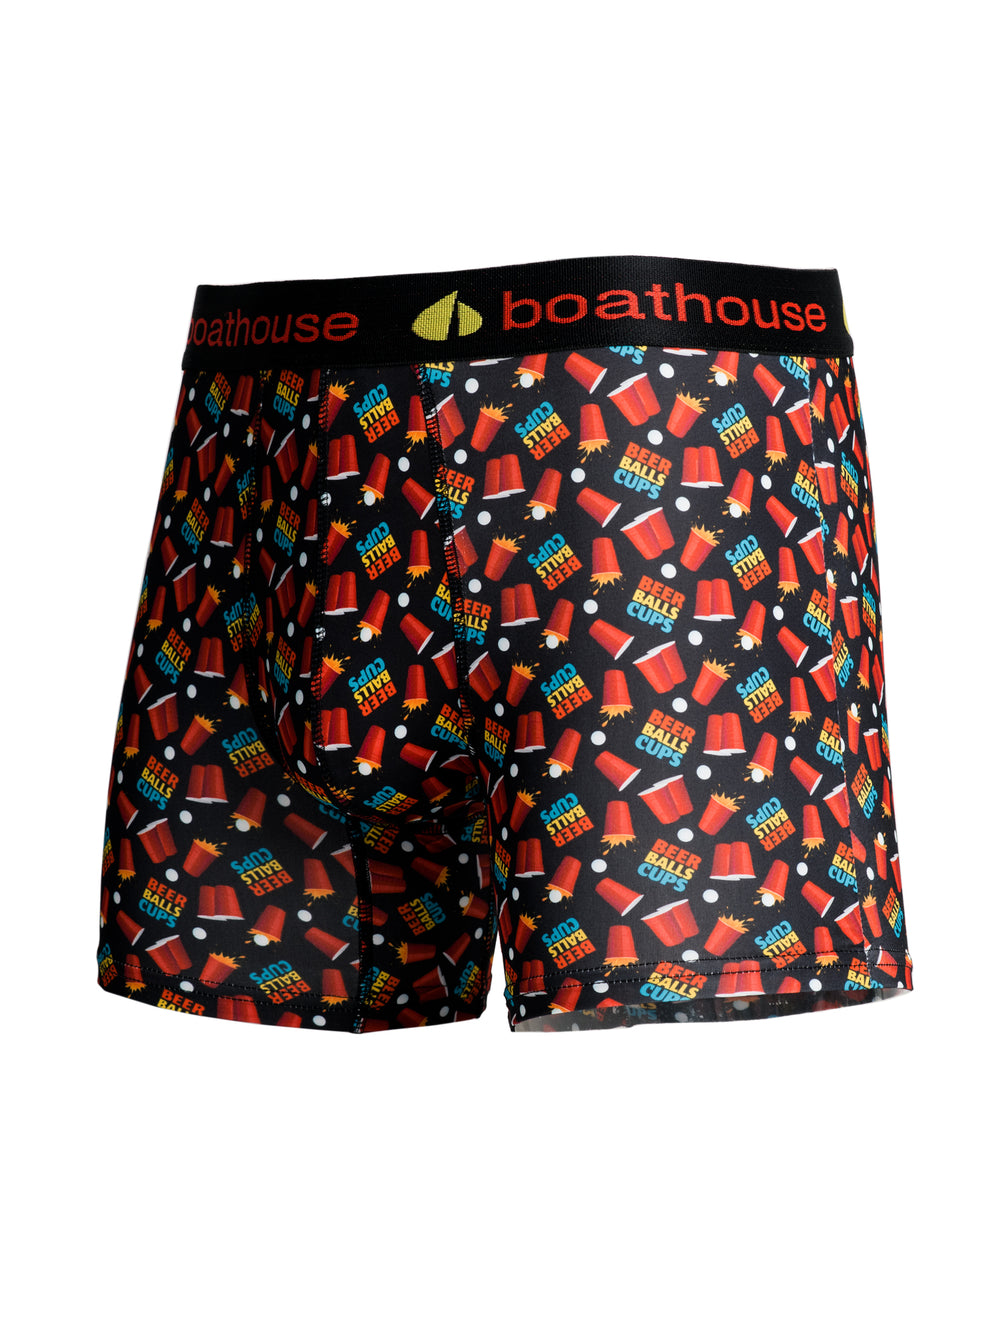 BOATHOUSE NOVELTY BOXER BRIEF - BEER PONG - CLEARANCE